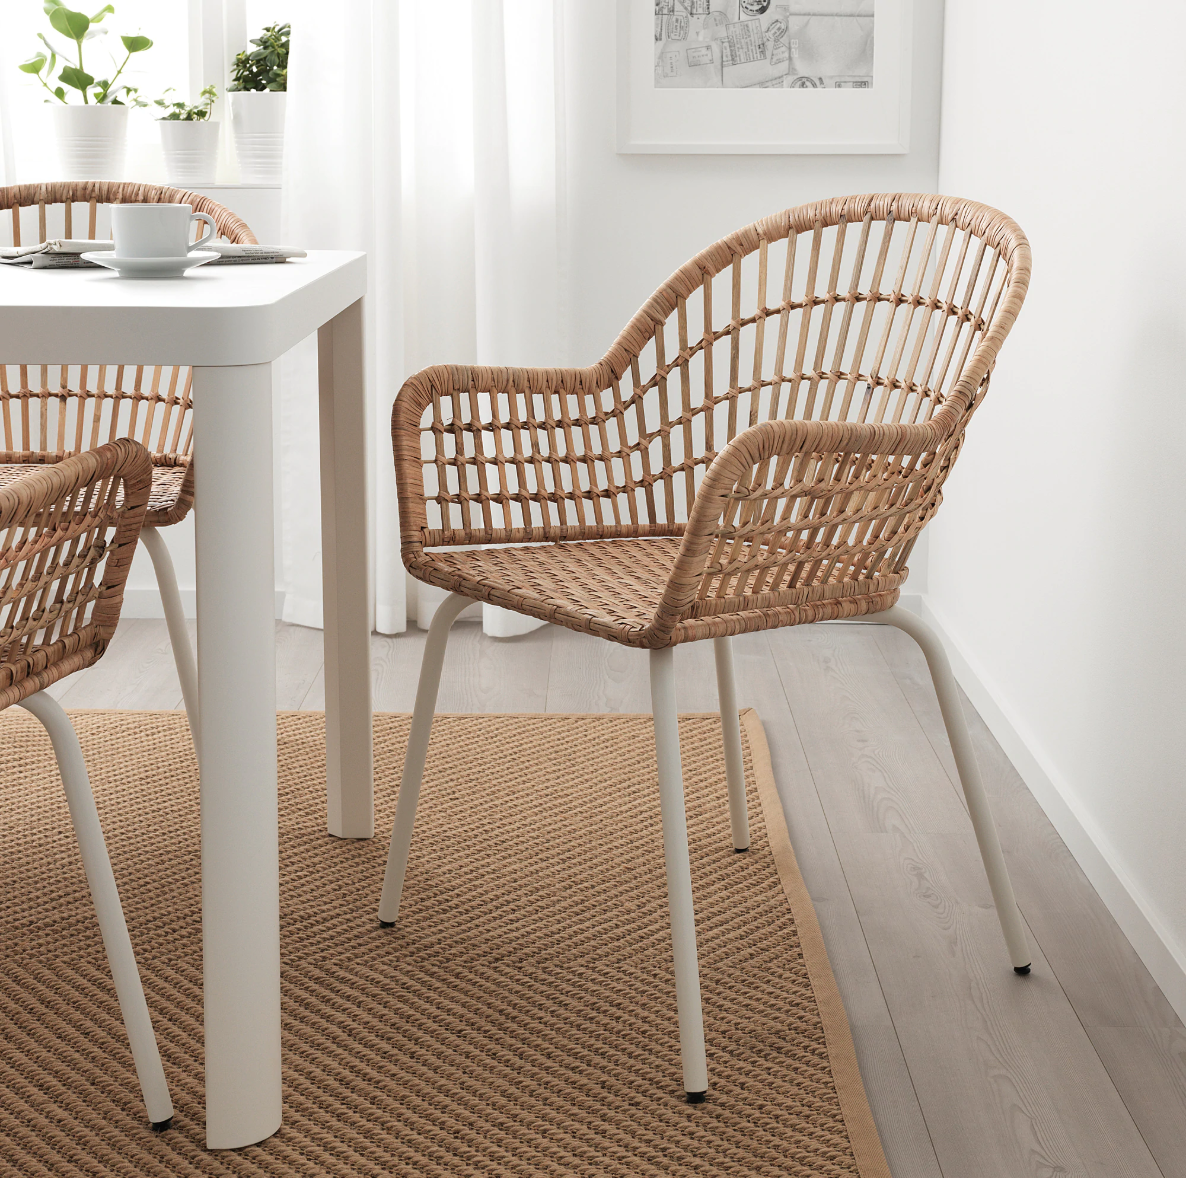 10 Best Ikea Kitchen Tables And Dining, Round Kitchen Table And 4 Chairs Ikea